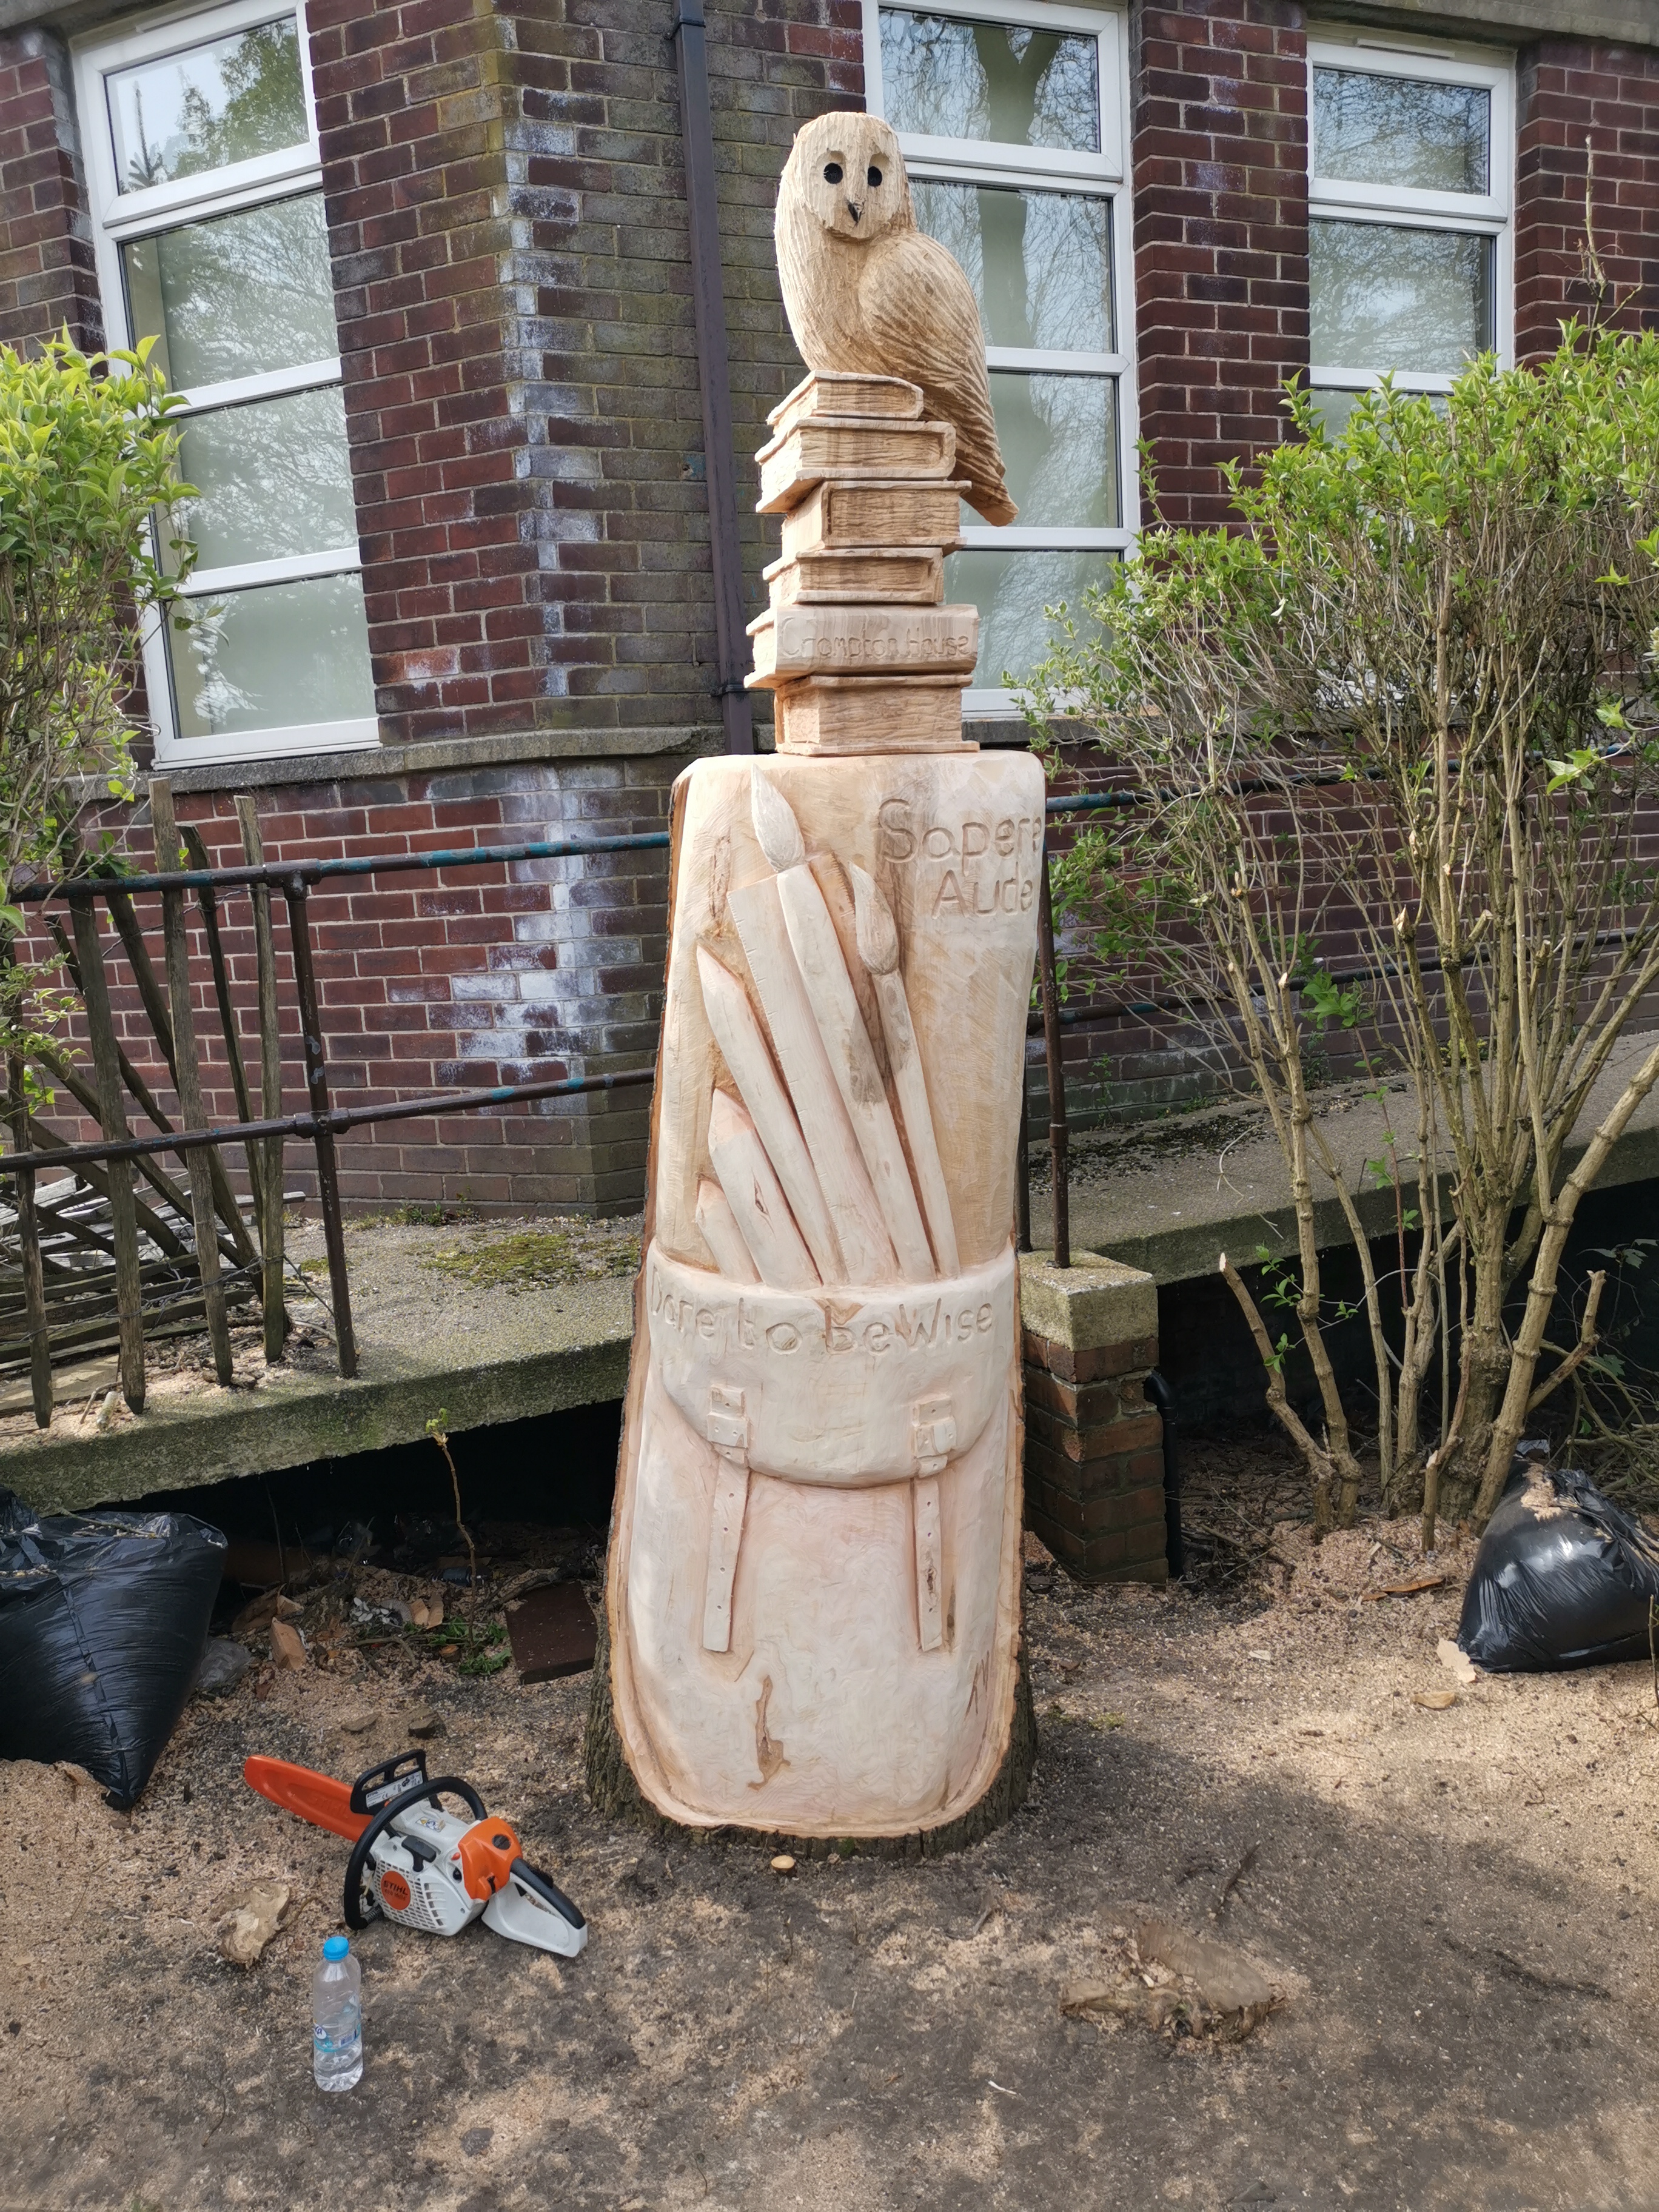 A school theme carving I did, for a school